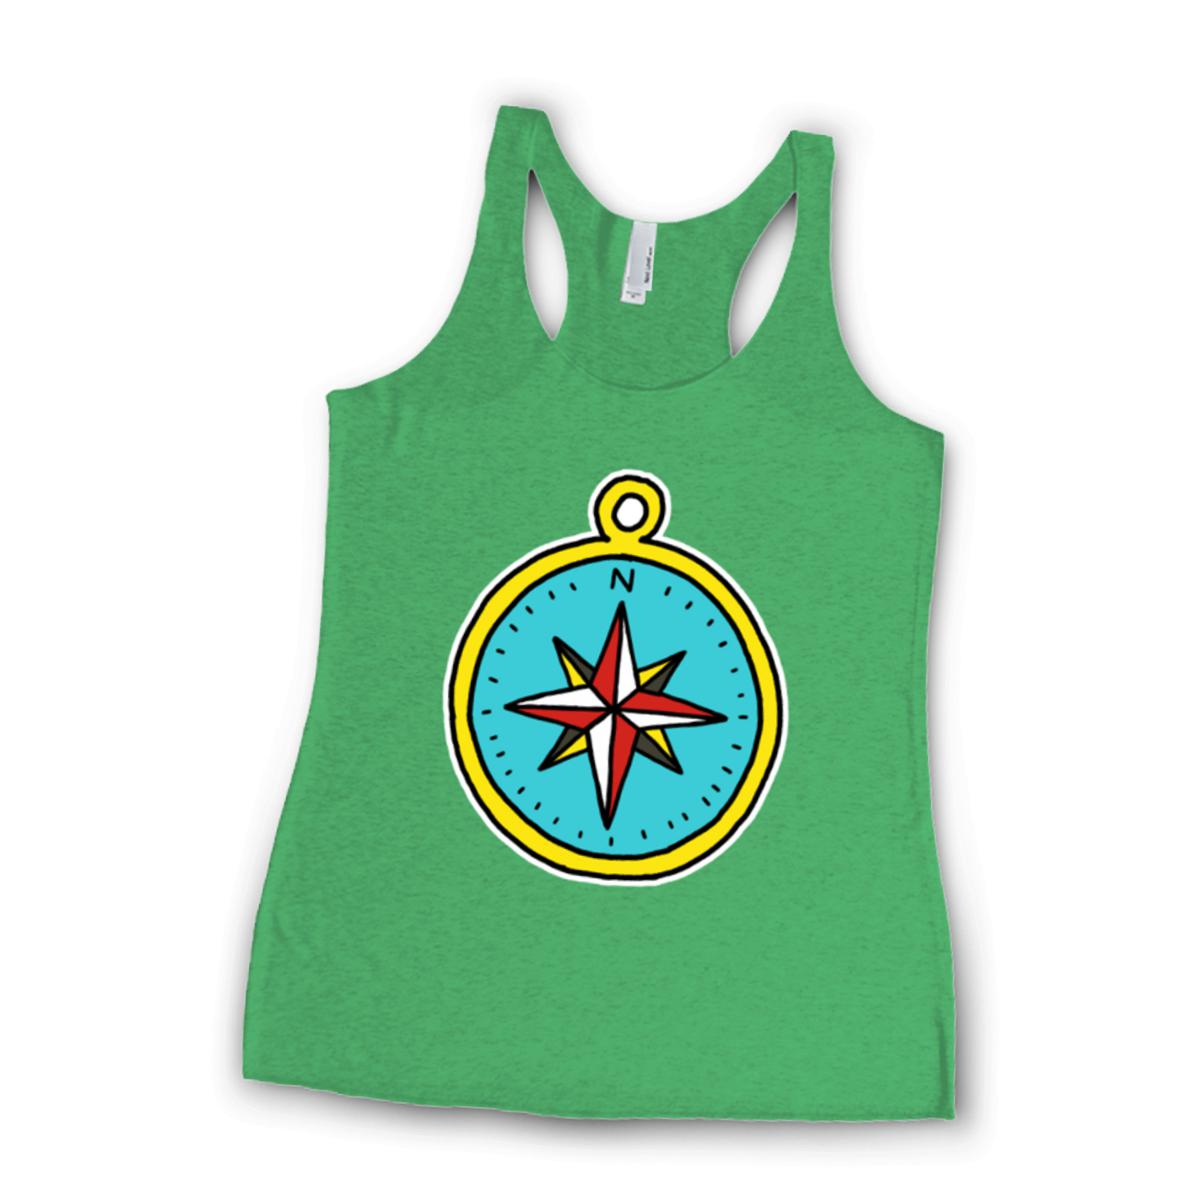 American Traditional Compass Ladies' Racerback Tank Large envy-green